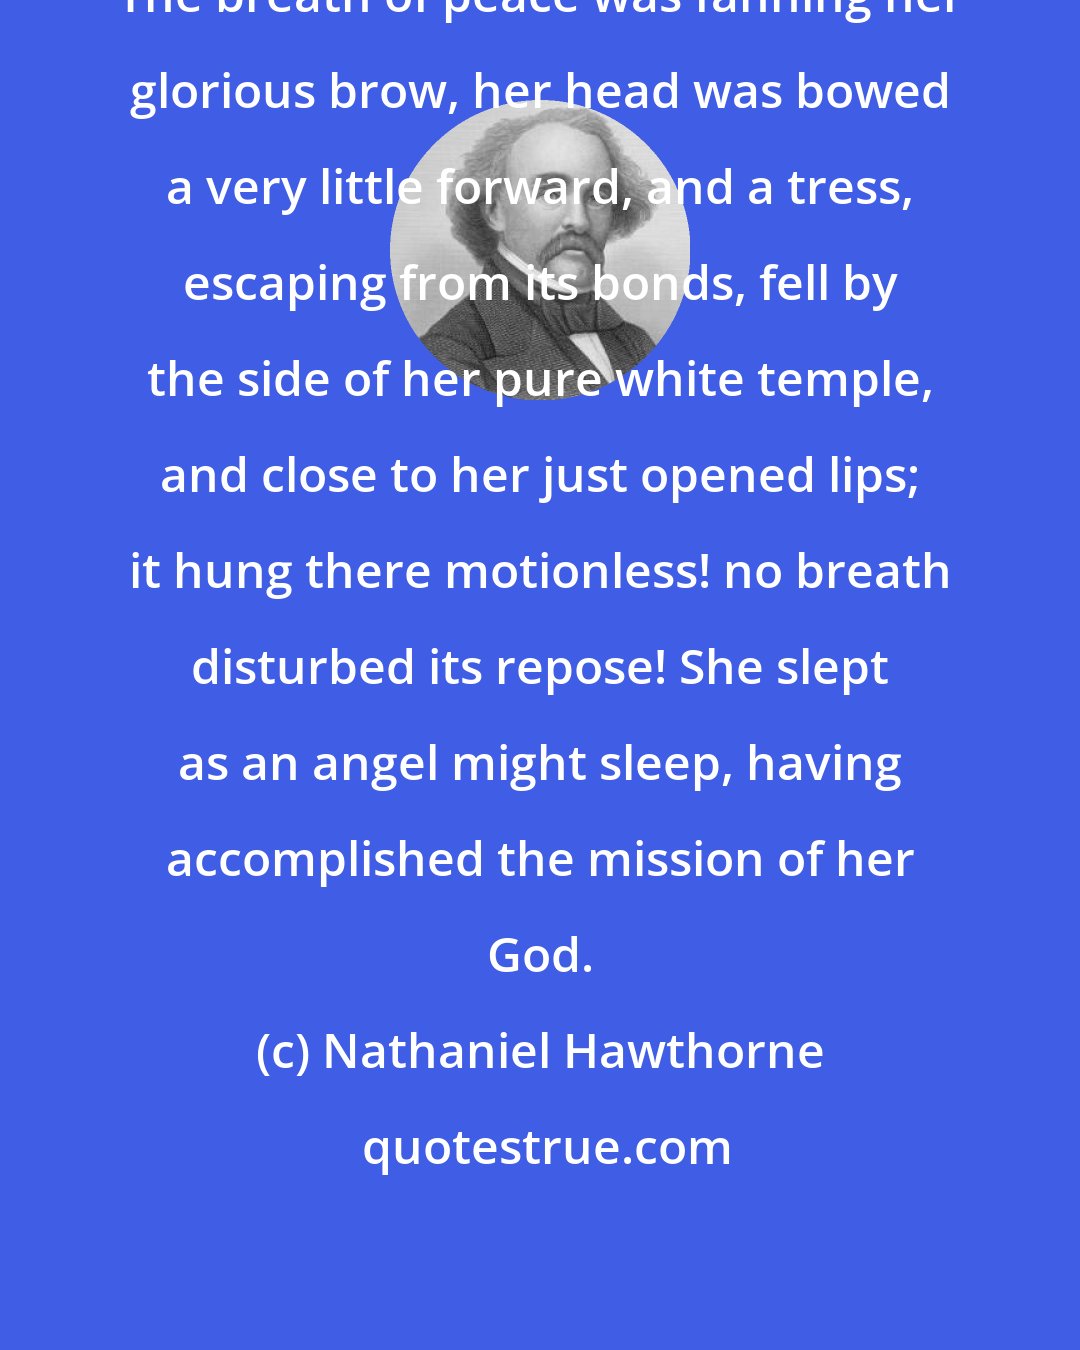 Nathaniel Hawthorne: The breath of peace was fanning her glorious brow, her head was bowed a very little forward, and a tress, escaping from its bonds, fell by the side of her pure white temple, and close to her just opened lips; it hung there motionless! no breath disturbed its repose! She slept as an angel might sleep, having accomplished the mission of her God.